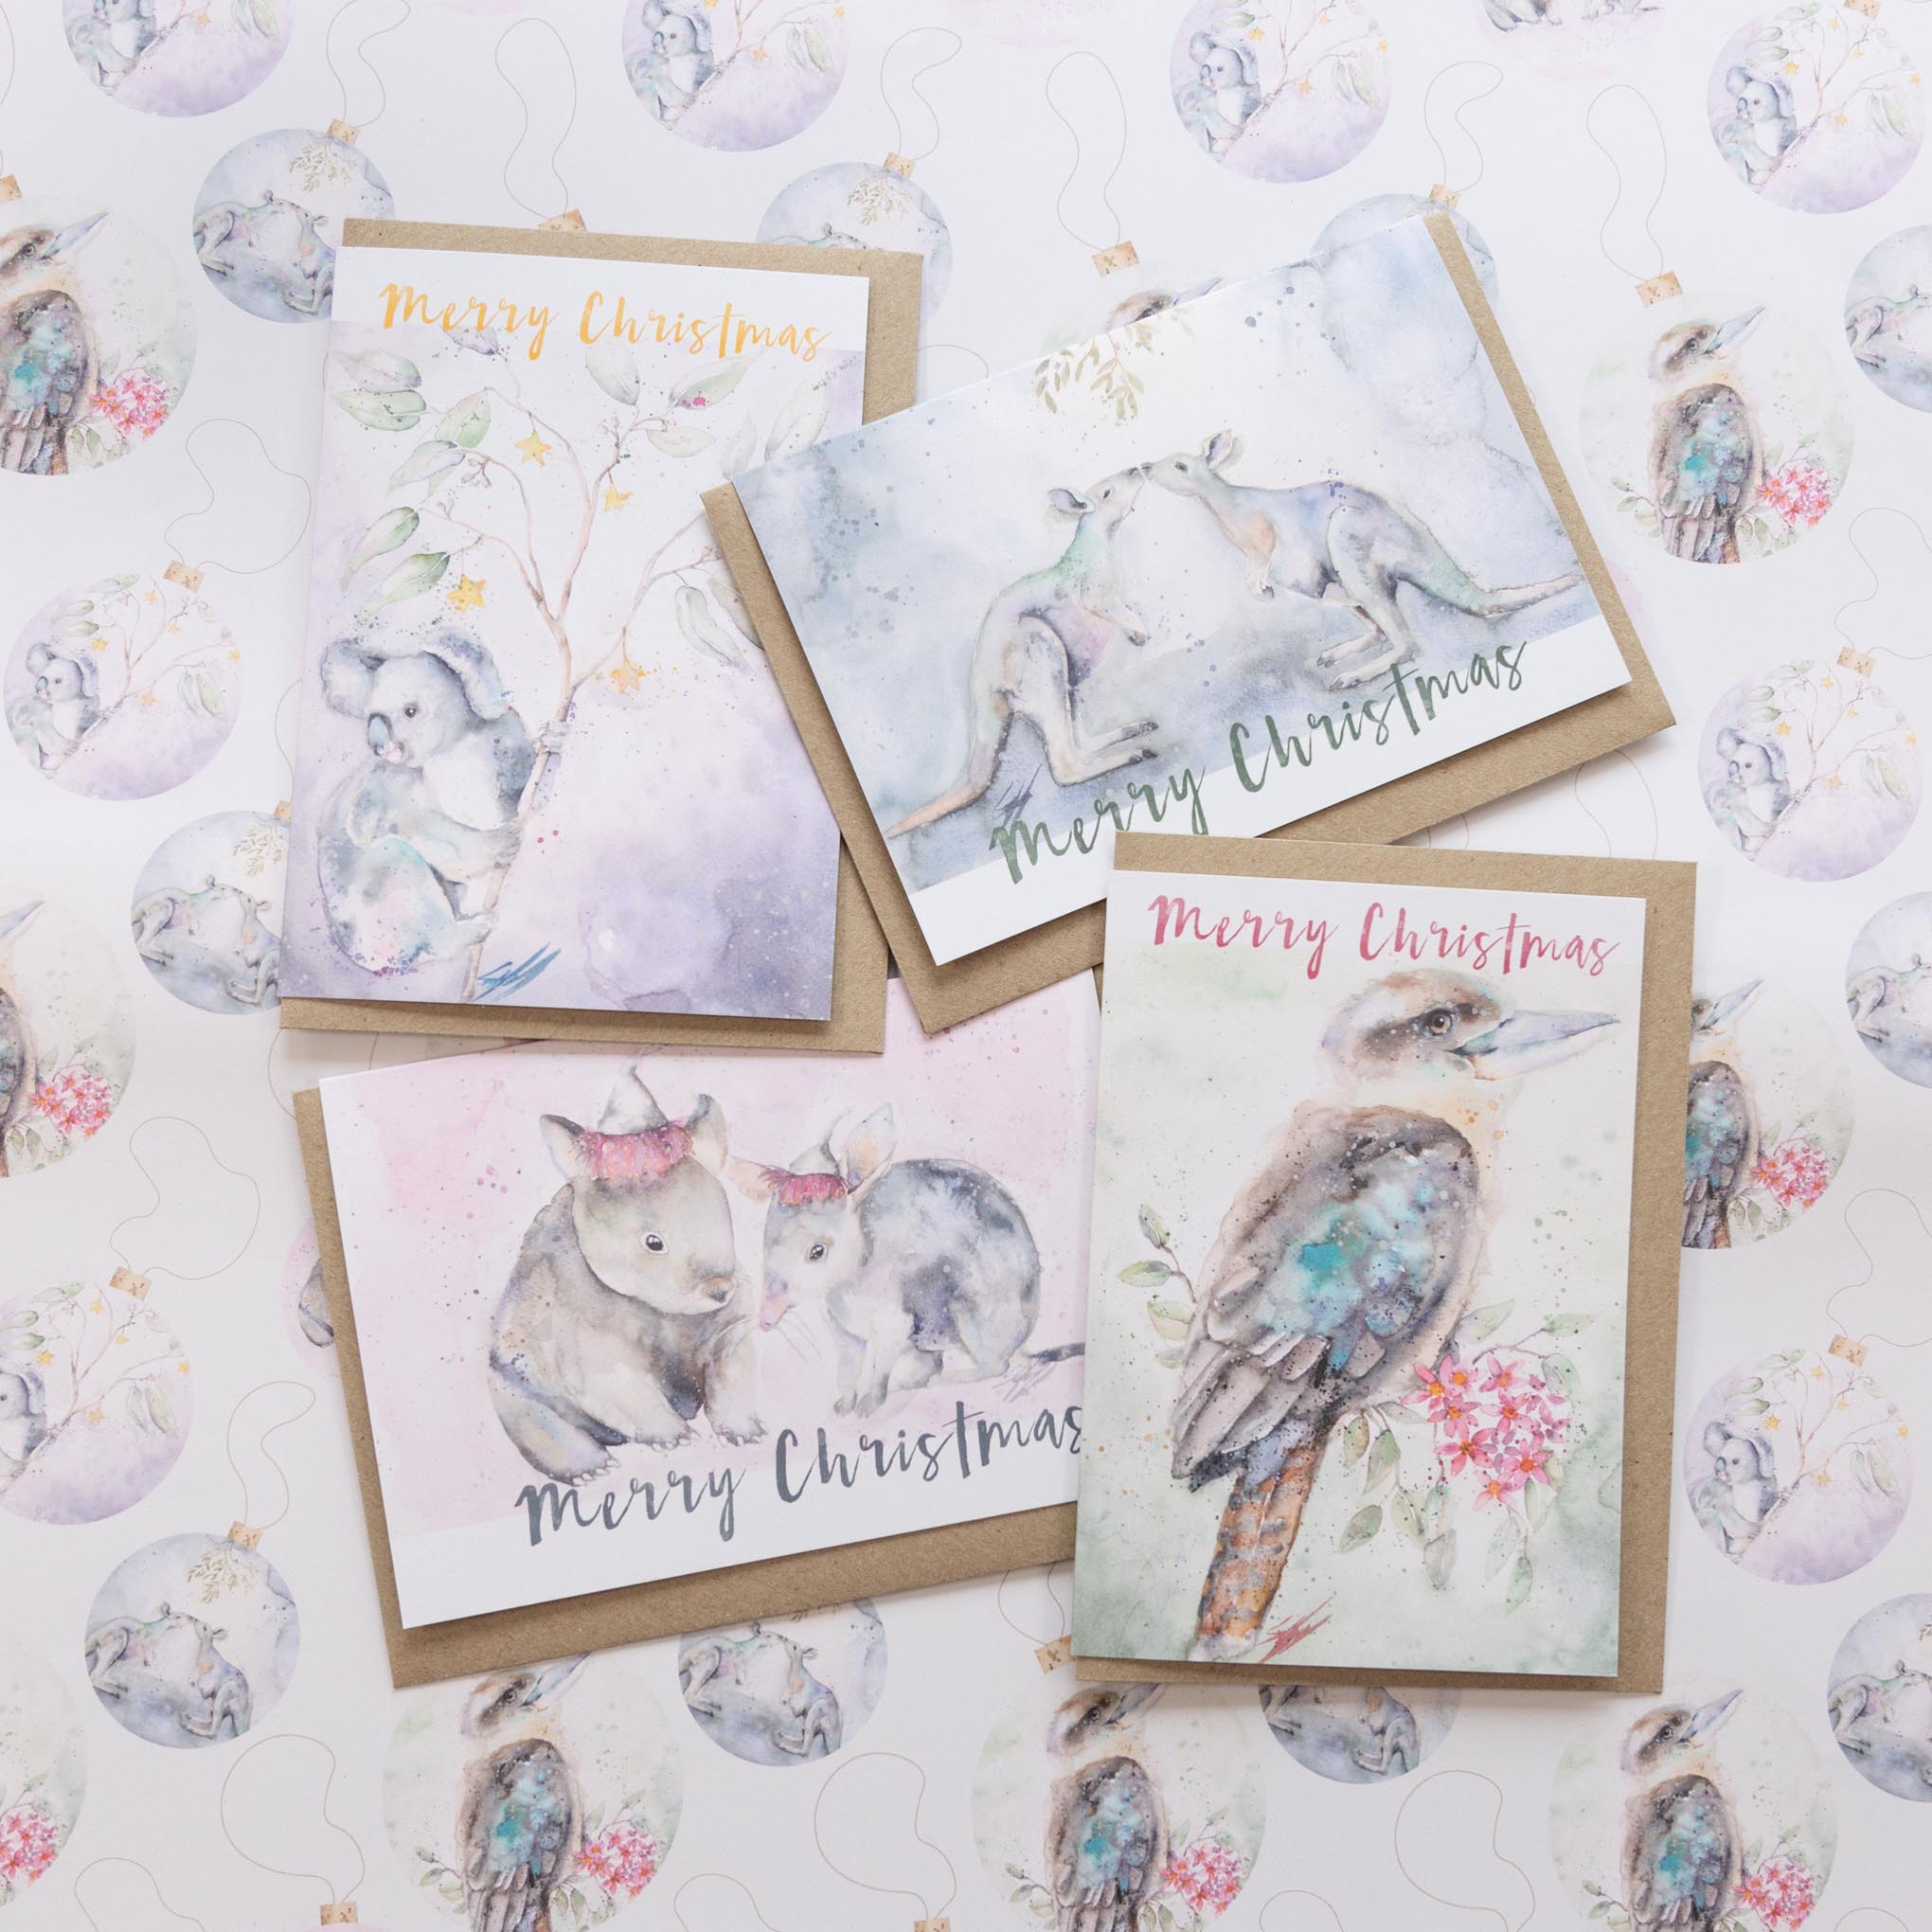 Christmas Cards and wrapping paper